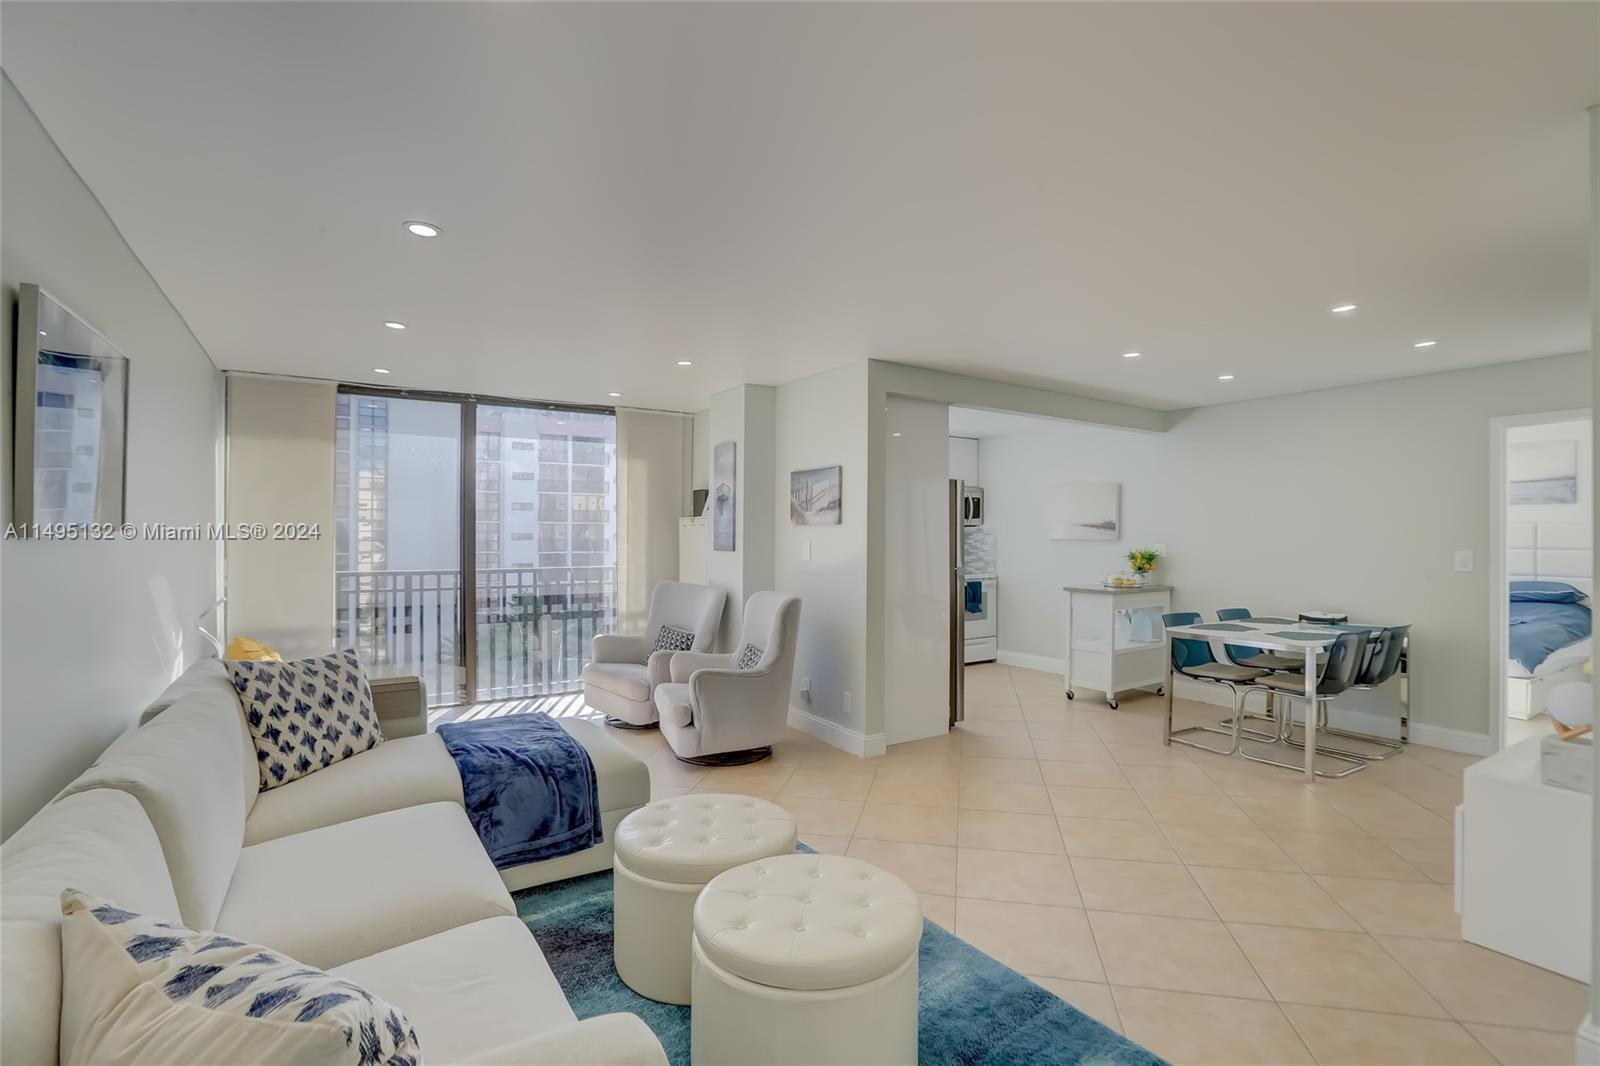 Experience the best of Sunny Isles Beach living with this 1 bed, 1.5 bath condo just steps from the 